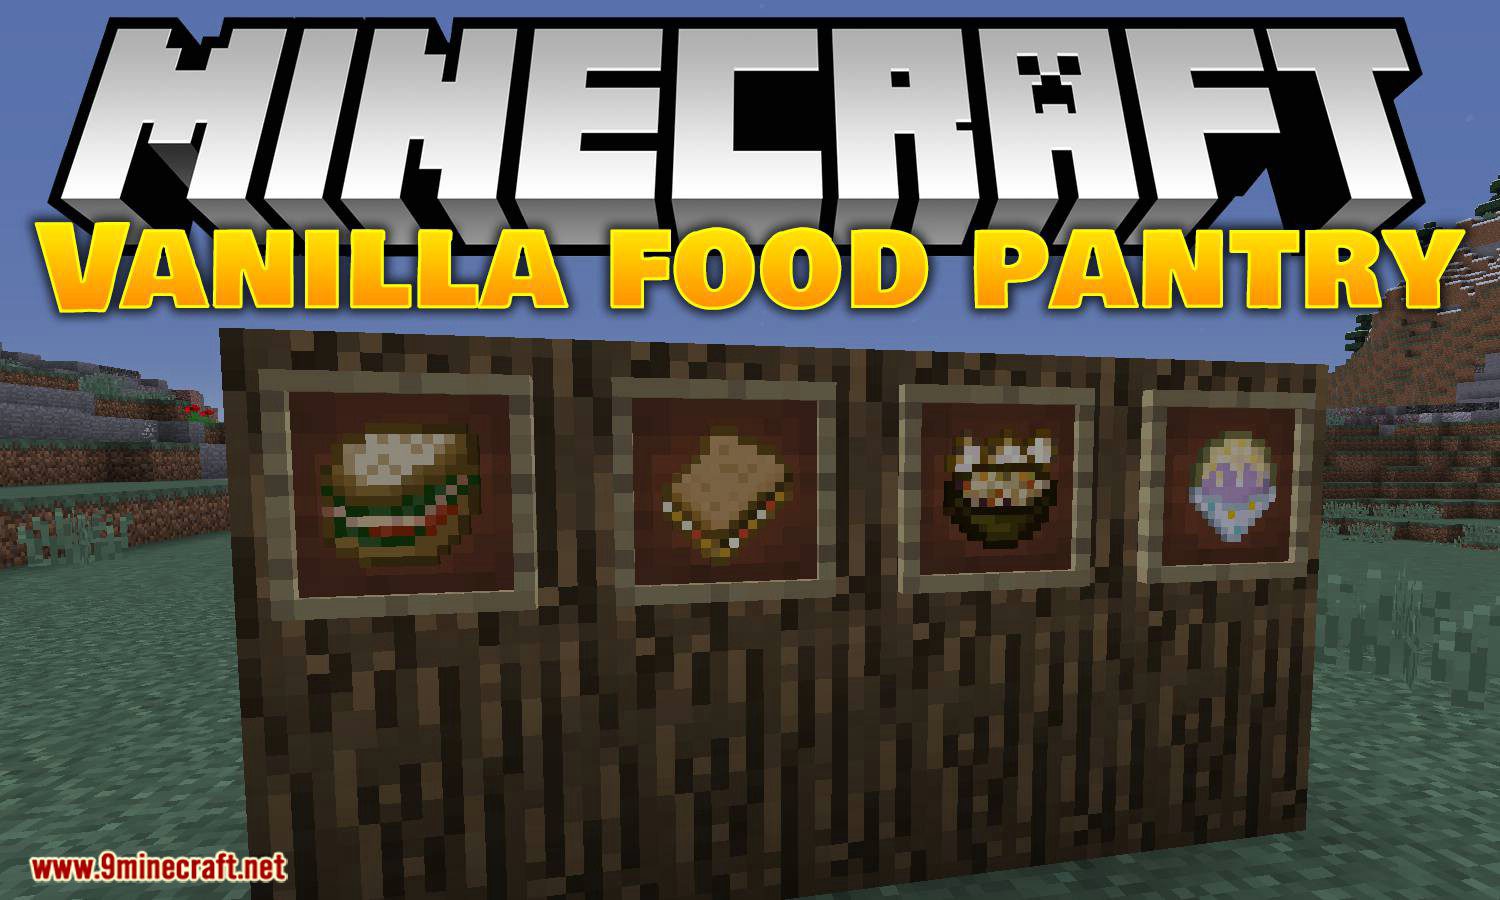 VanillaFoodPantry Mod 1.16.5, 1.15.2 (More Recipes, Better Storage for Food) 1